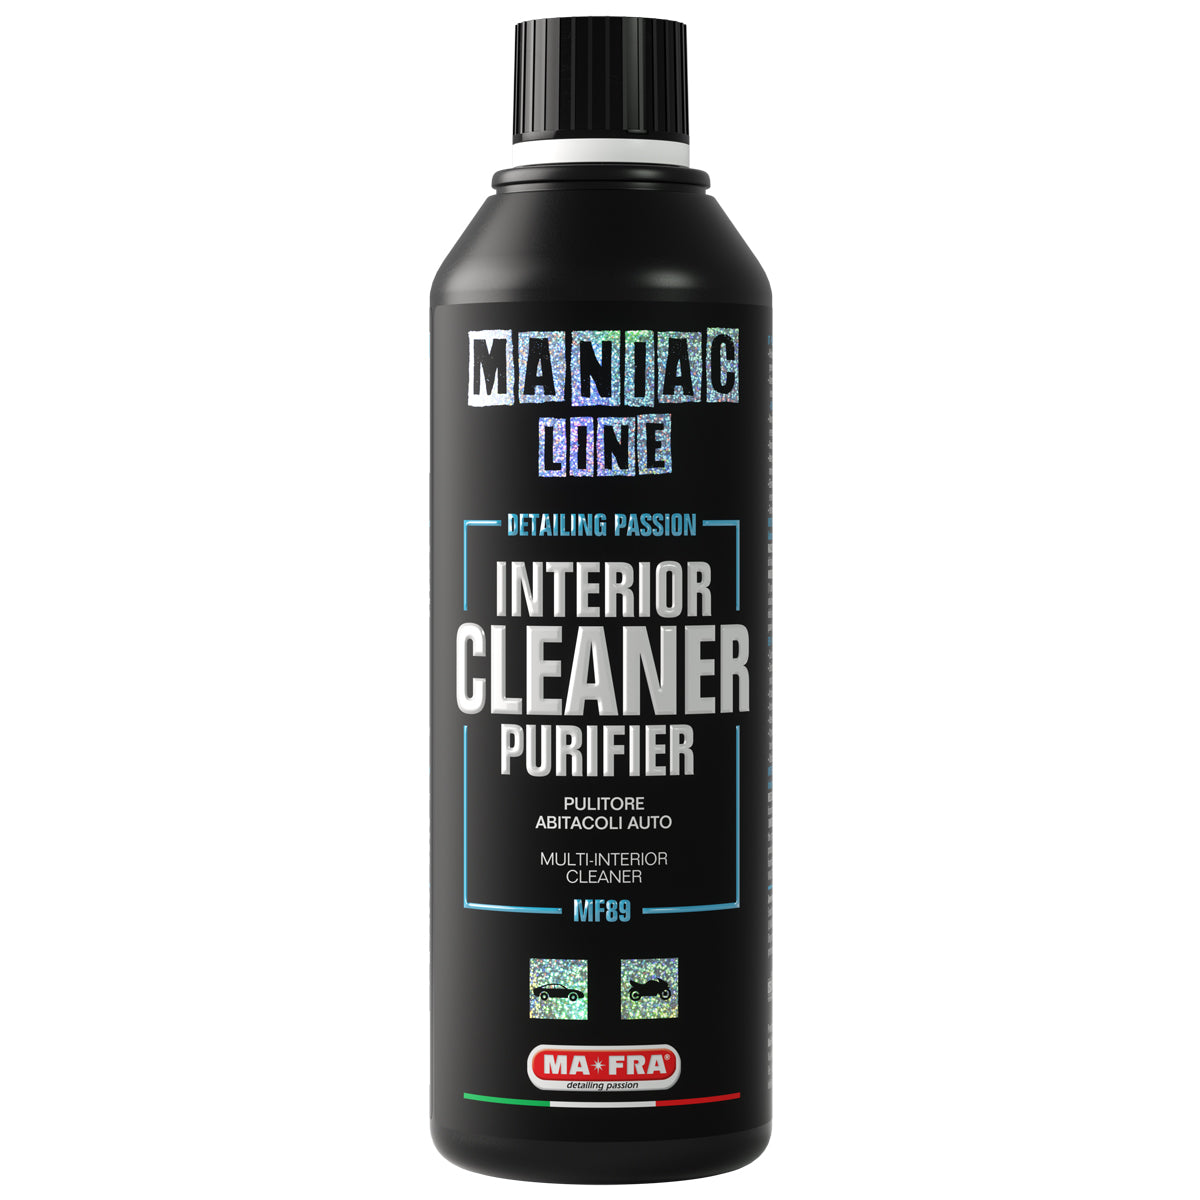 Ma-Fra Maniac Line Interior Cleaner and Purifier. Kills Bacteria. Best and safe interior cleaner for carpets and plastics. Labocosmetica. Ma-Fra Ireland Cork